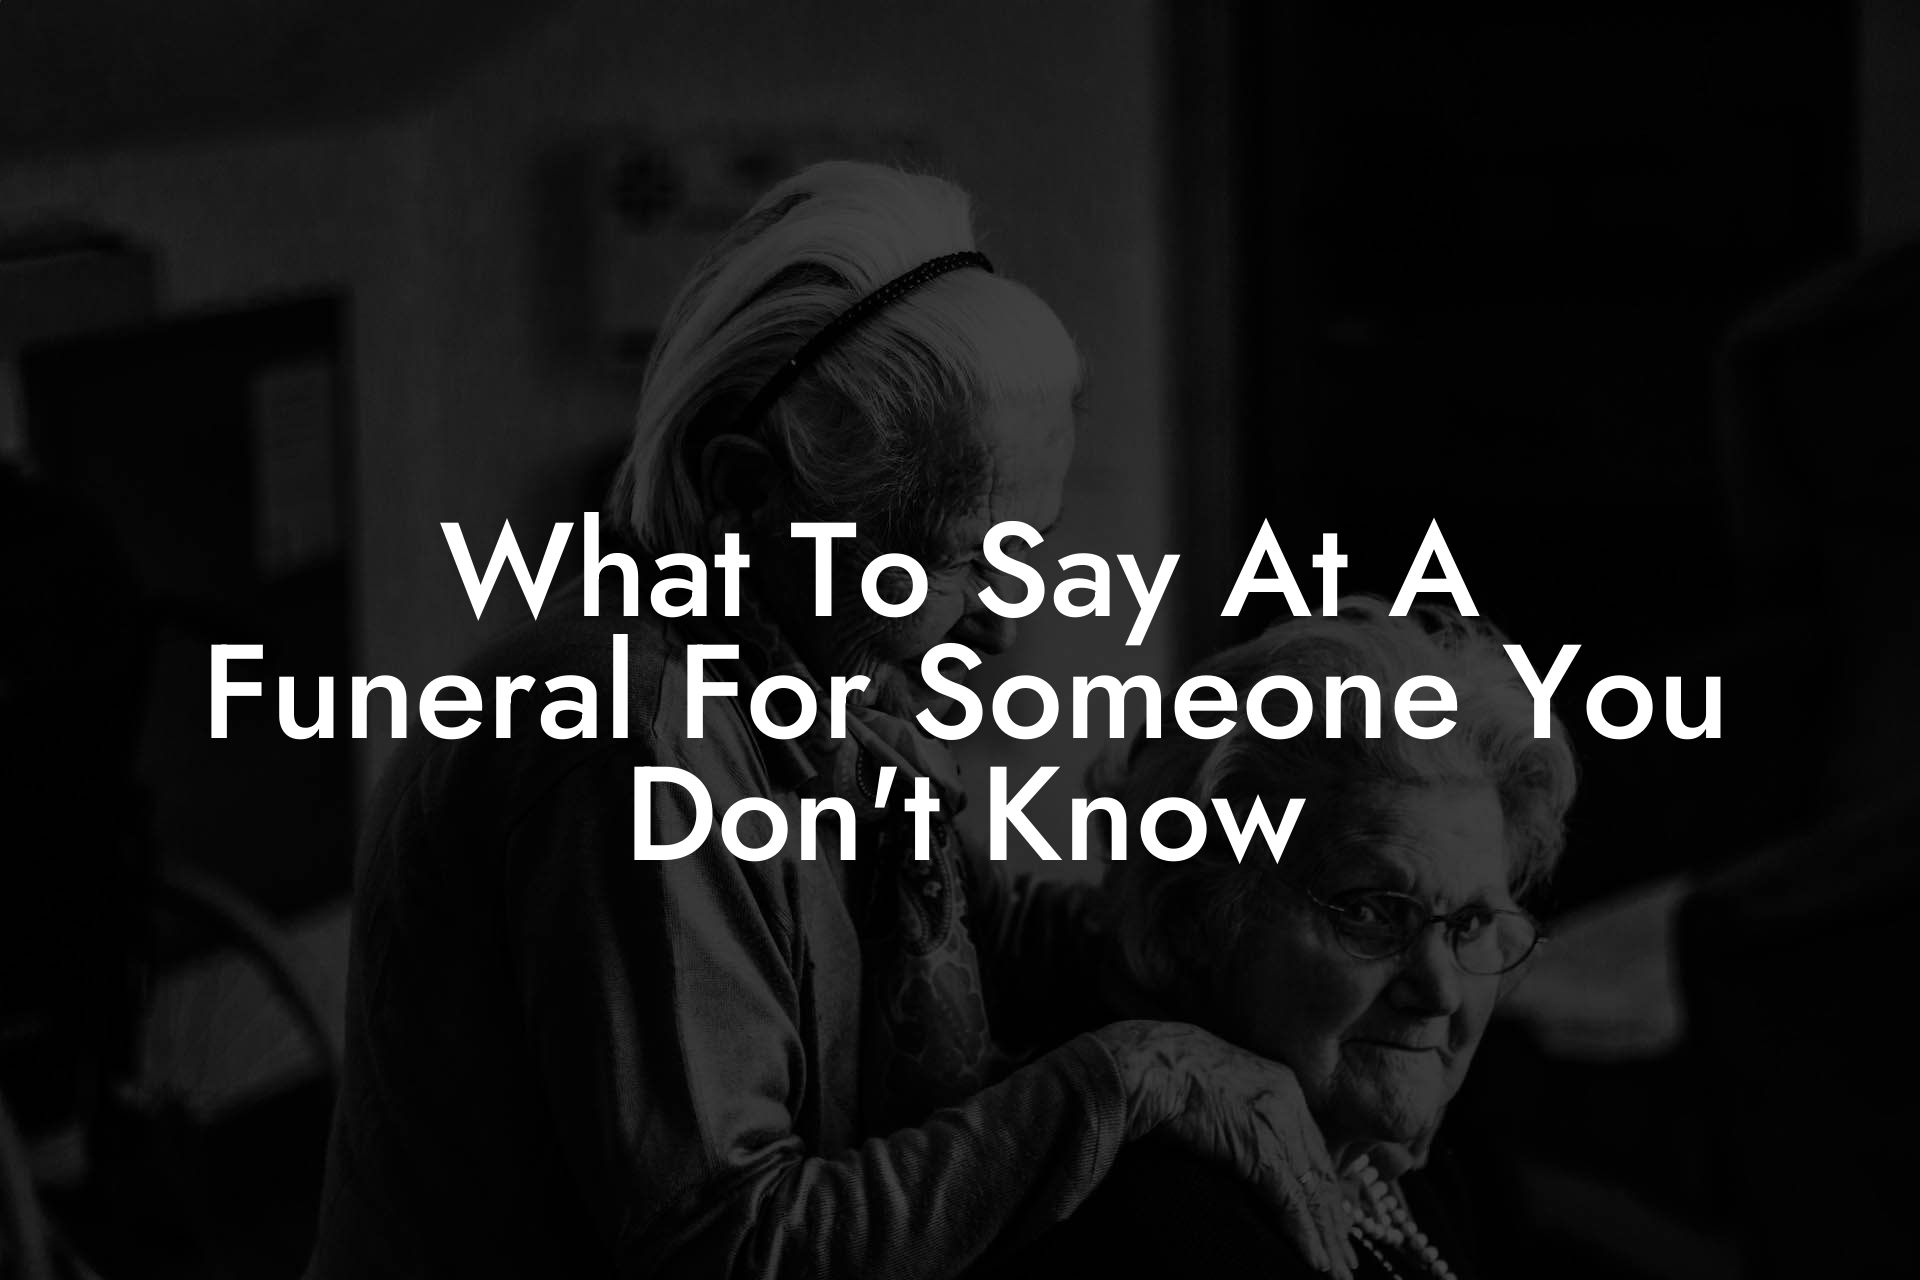 What To Say At A Funeral For Someone You Don't Know